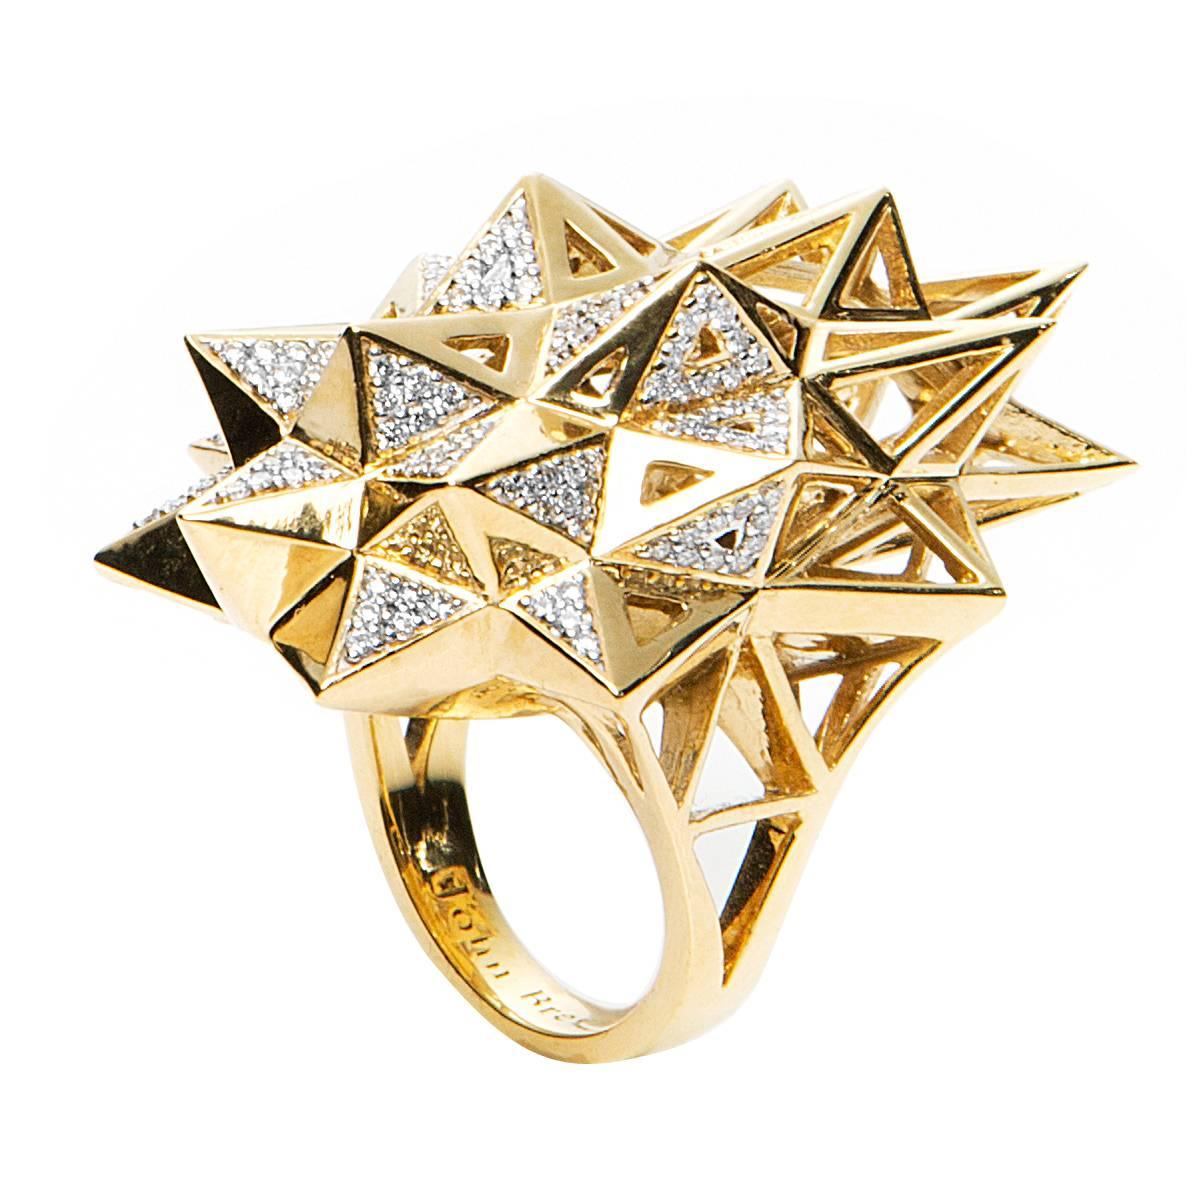 Stellated Star Diamond and 18K Gold Ring